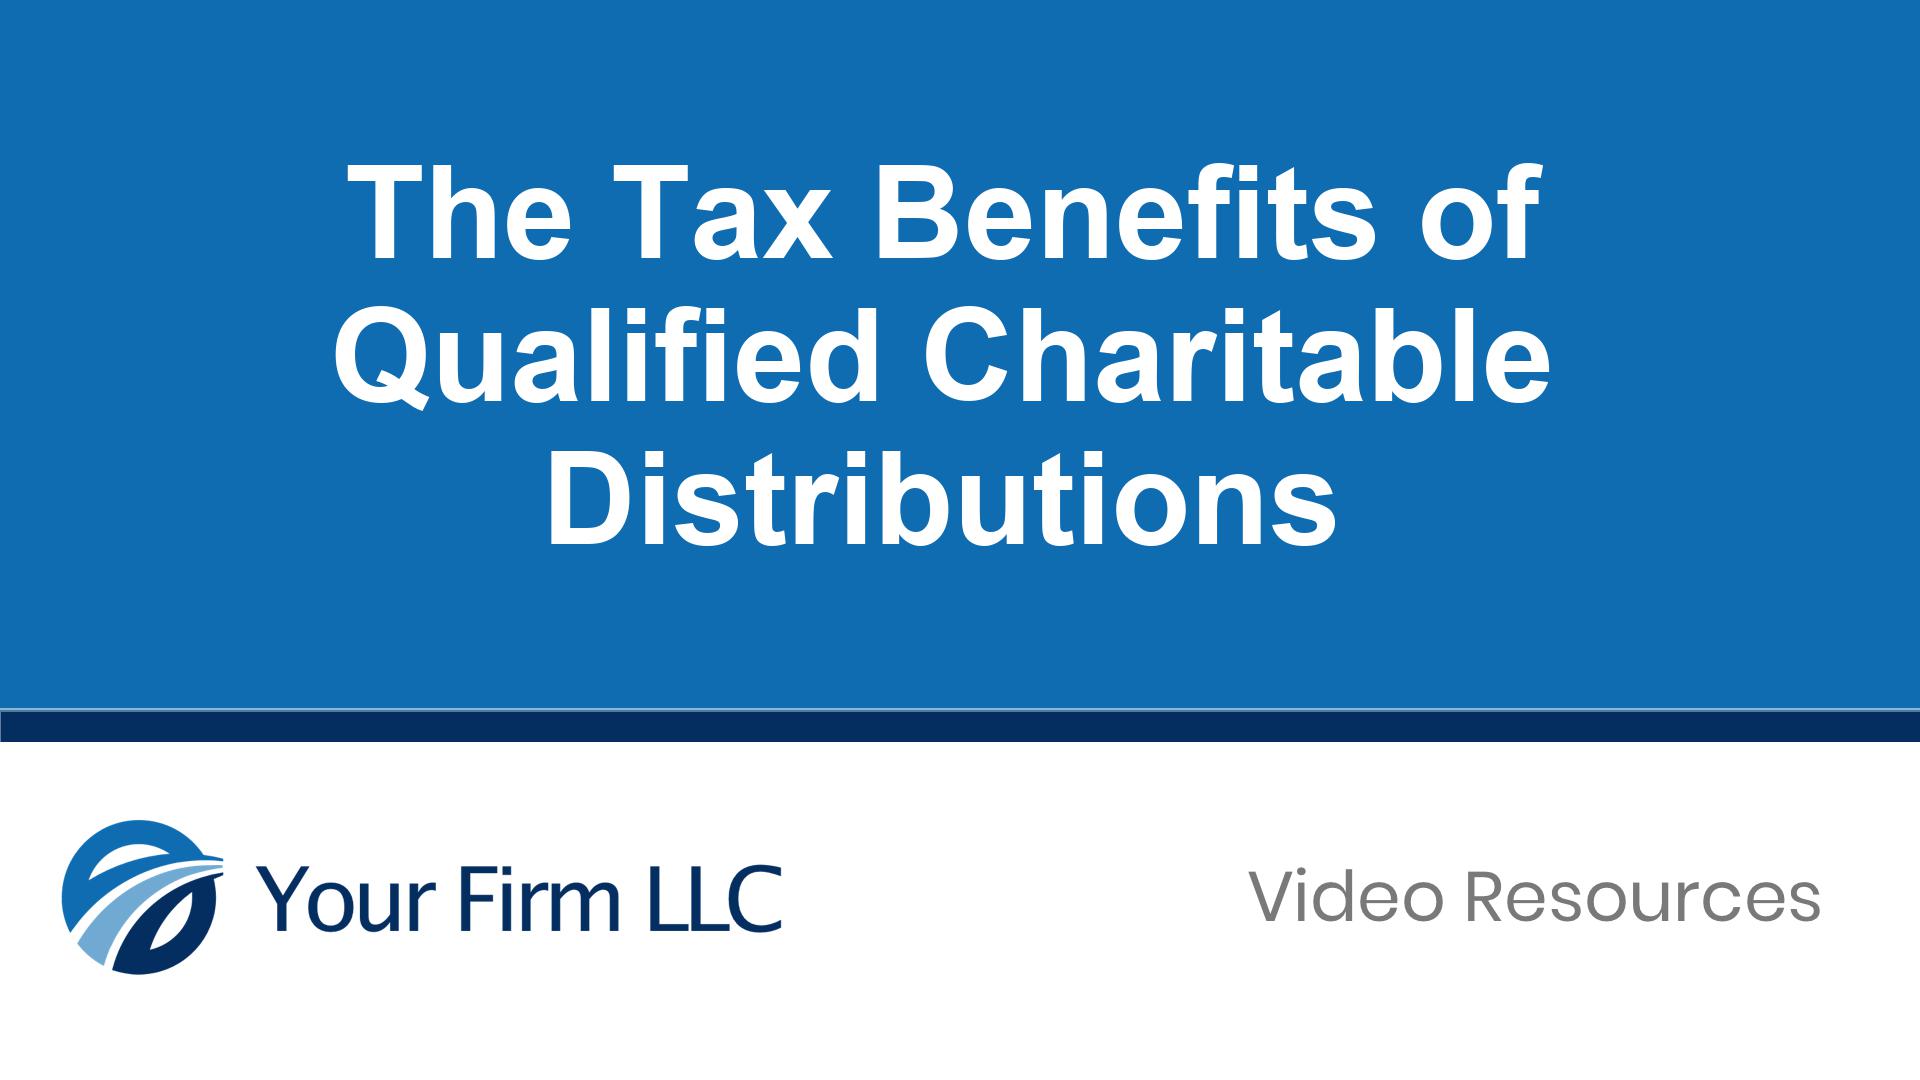 The Tax Benefits of Qualified Charitable Distributions